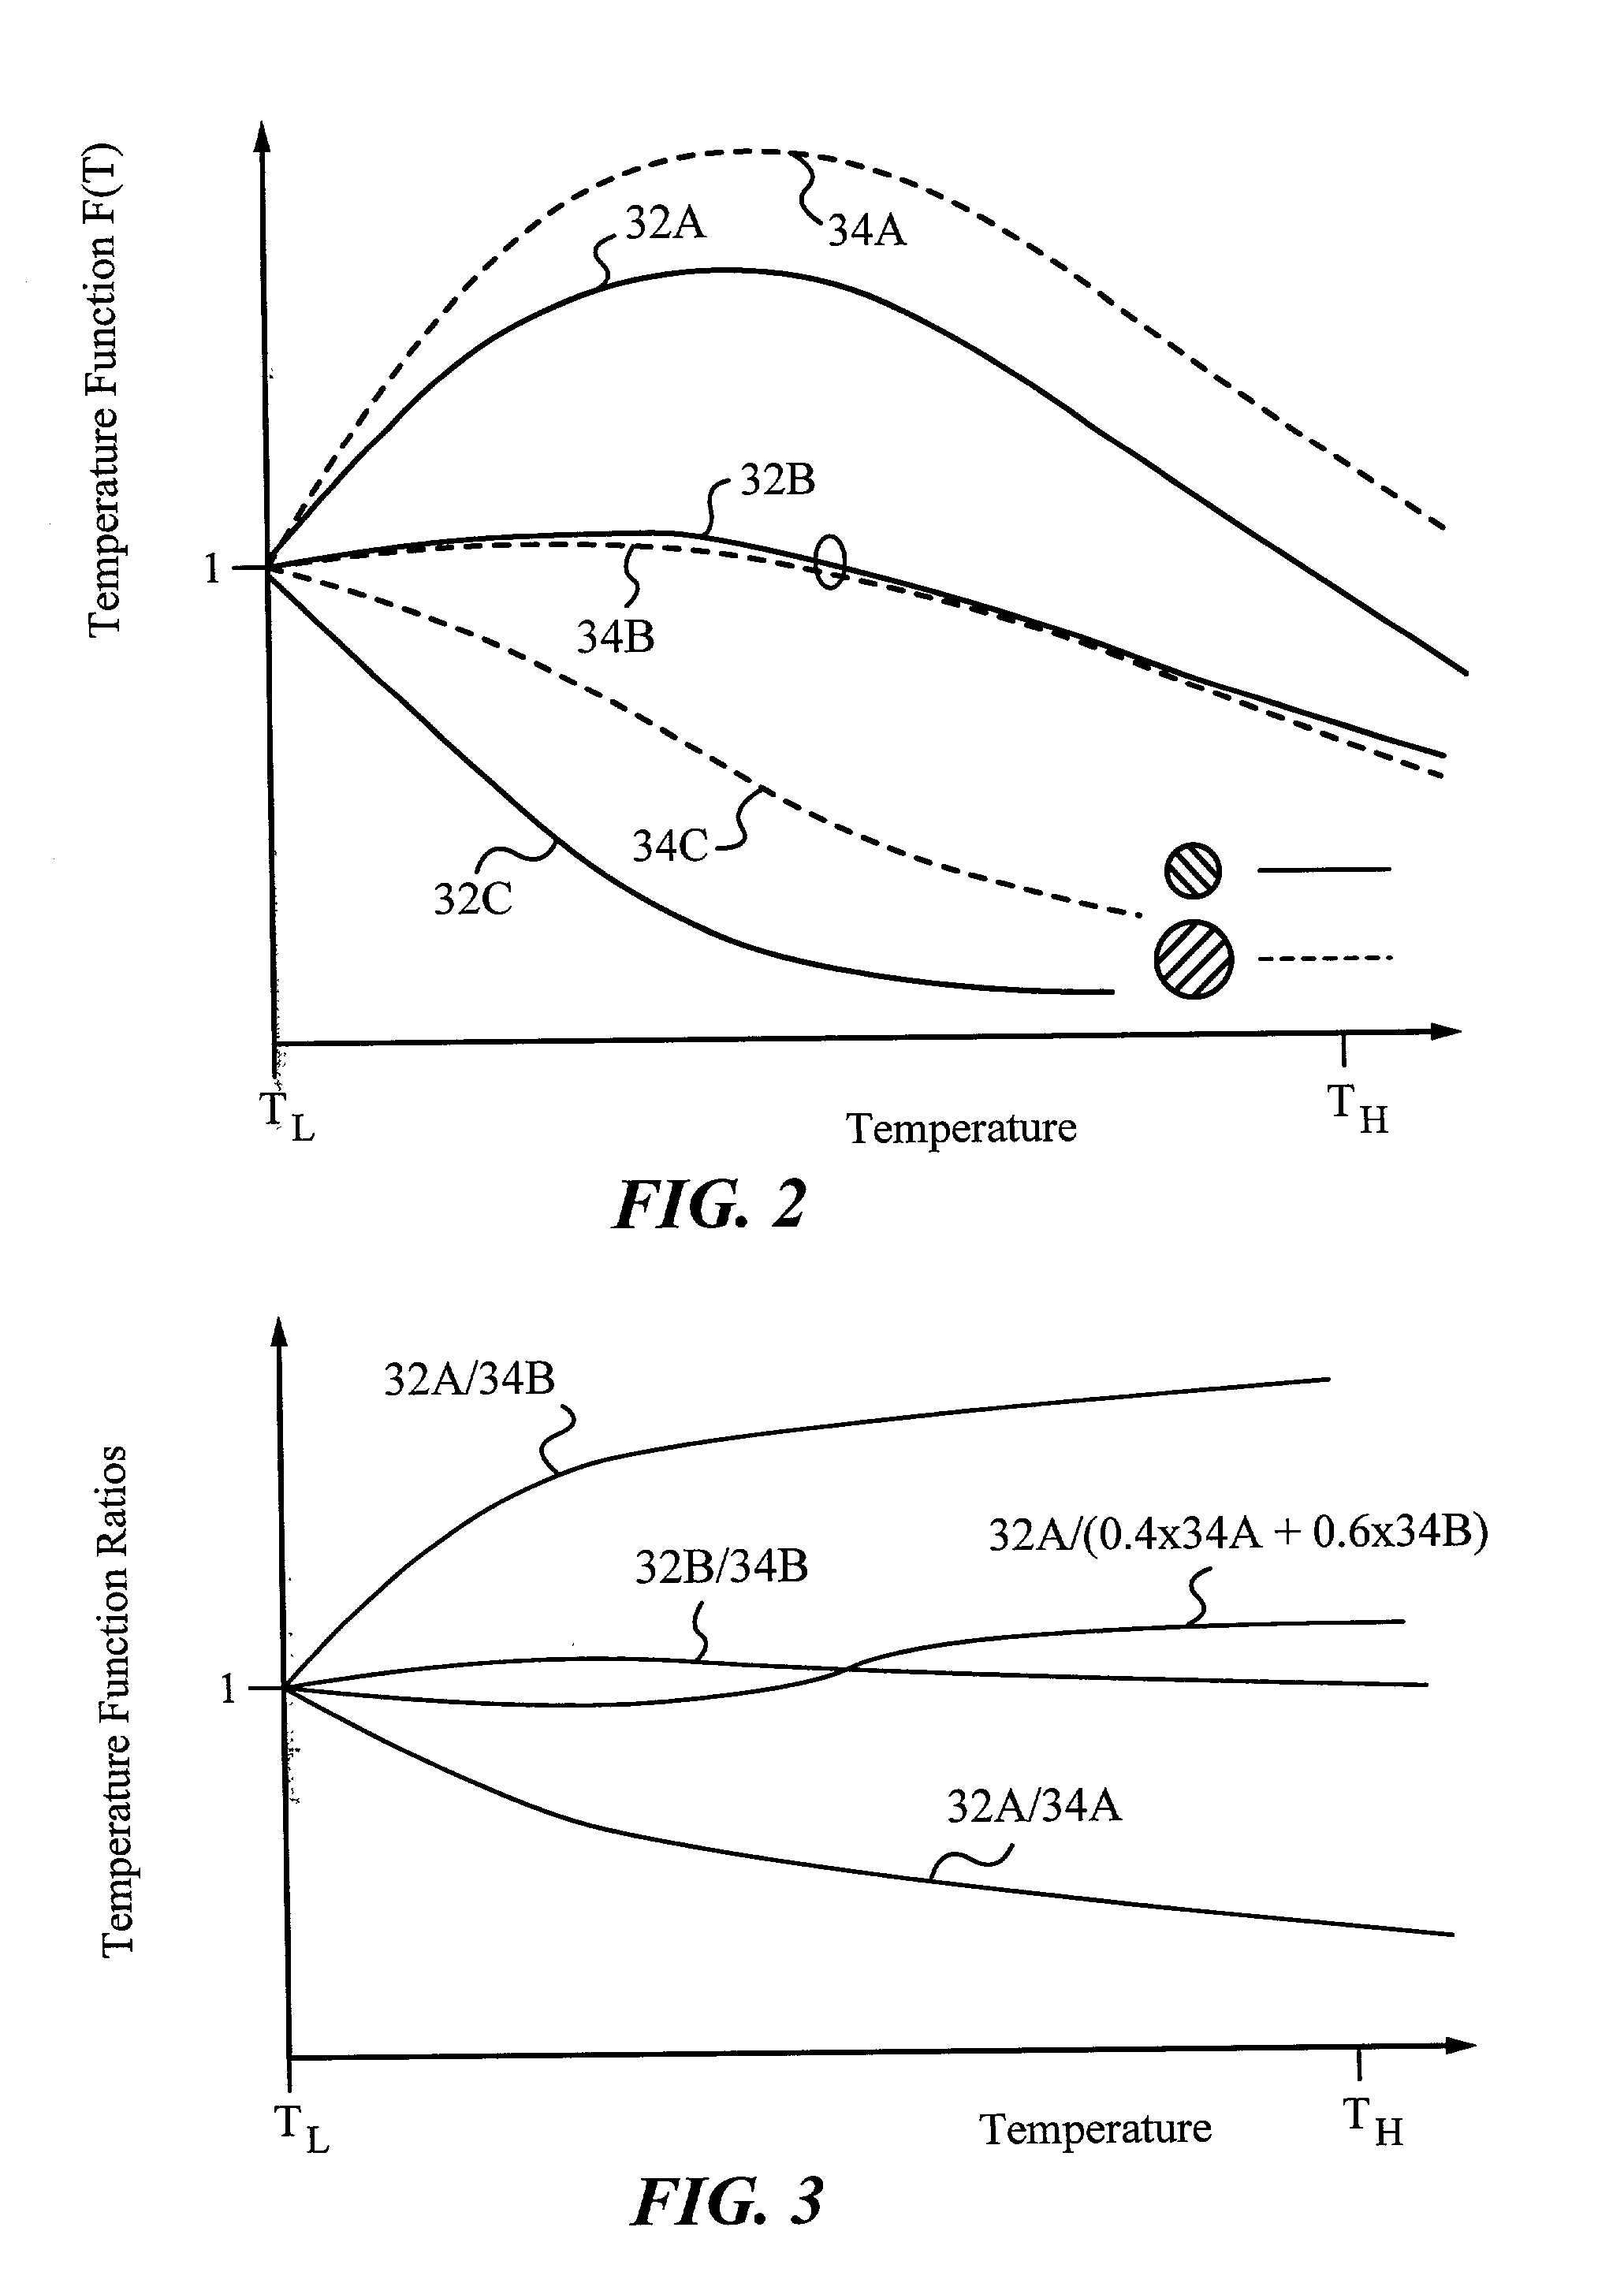 Temperature-independent measurements of gas concentration